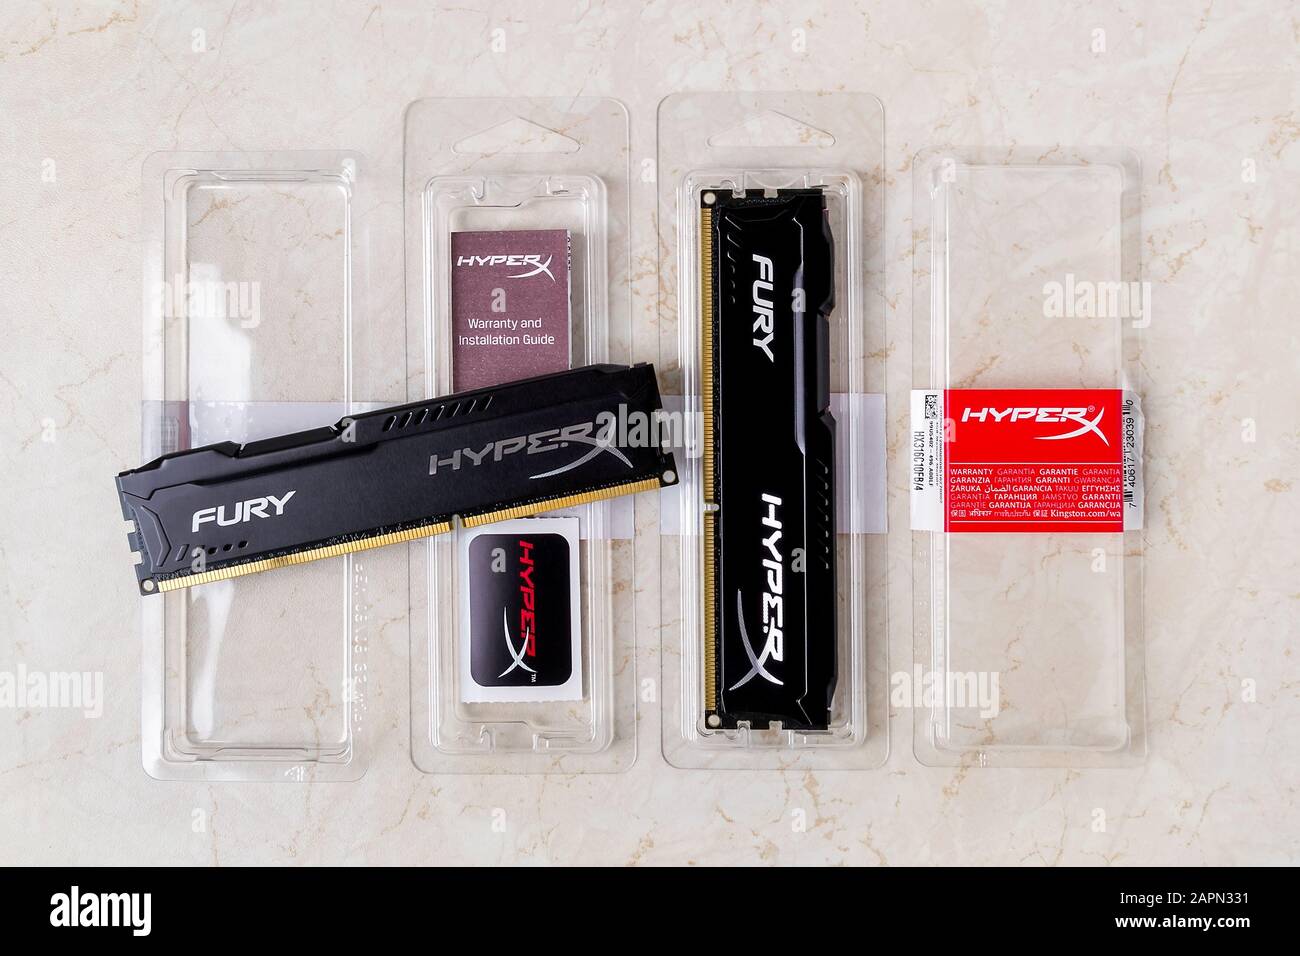 Varna, Bulgaria, January 23, 2020. Two opened boxes with RAM Kingston Fury memory modules, sticker and warranty. DIMM DDR 3 Kingston HyperX Fury. Stock Photo